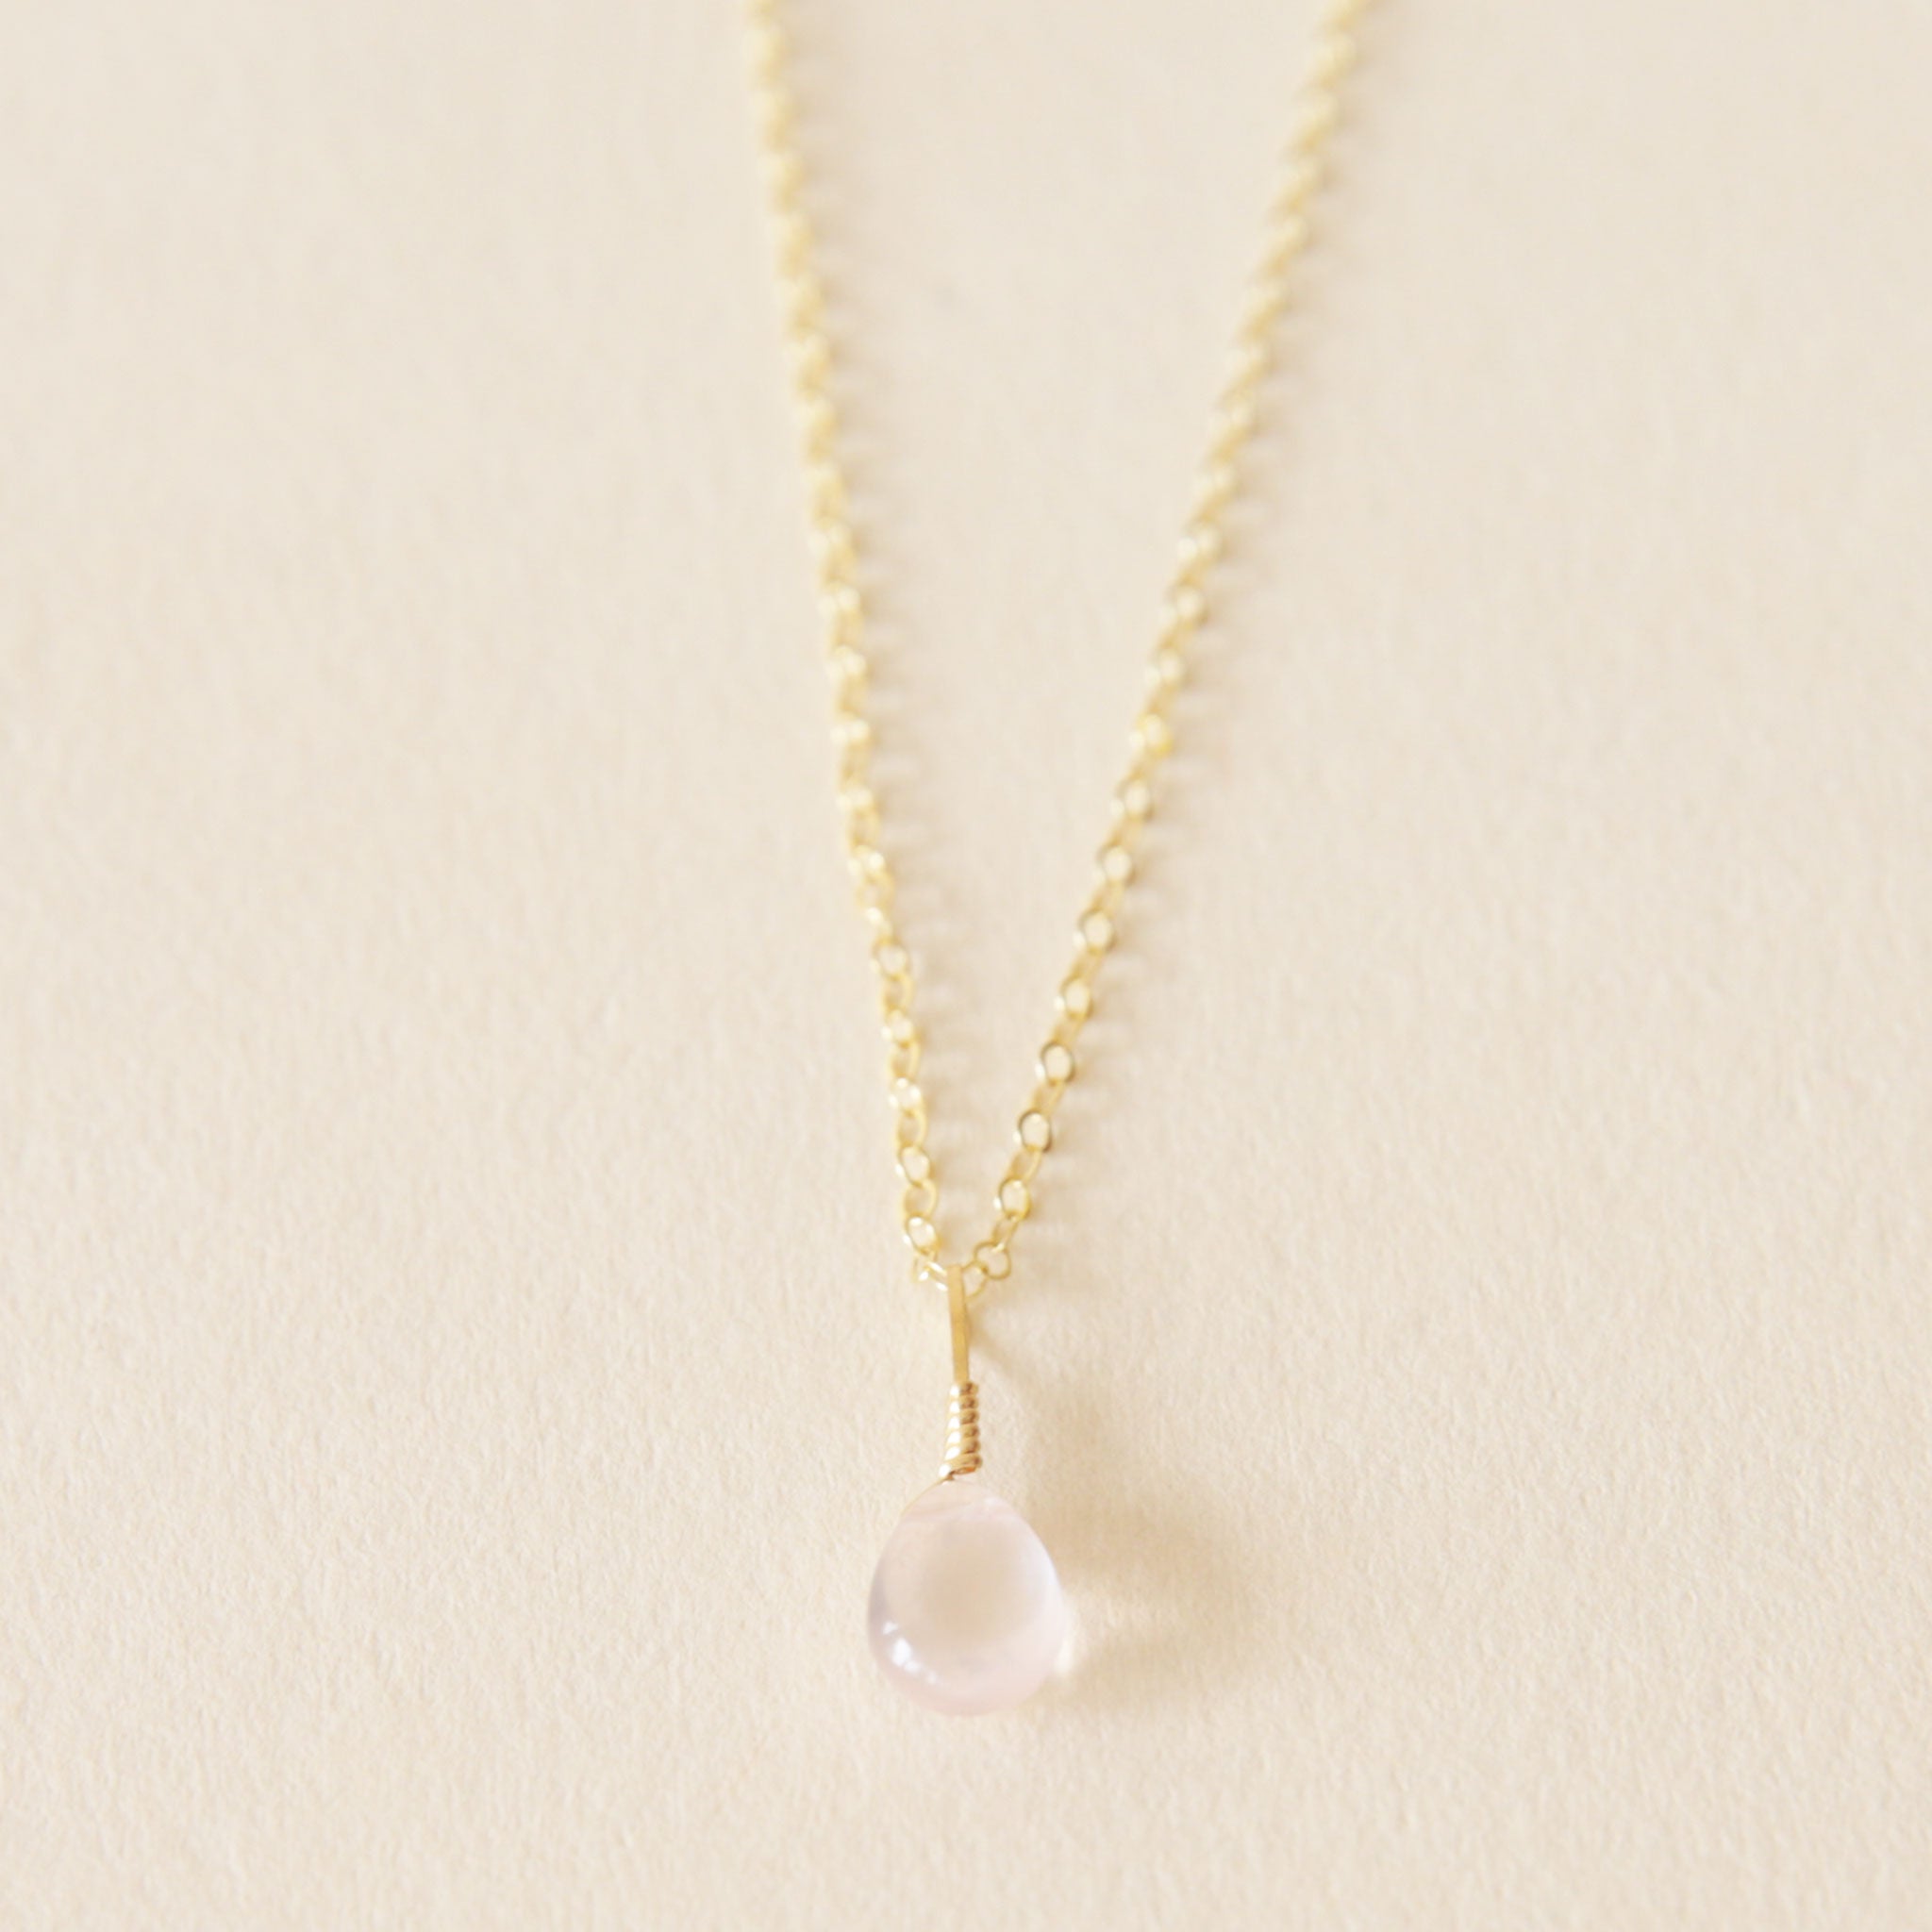 On a neutral background is a gold chain necklace with a rose quartz stone in the center.